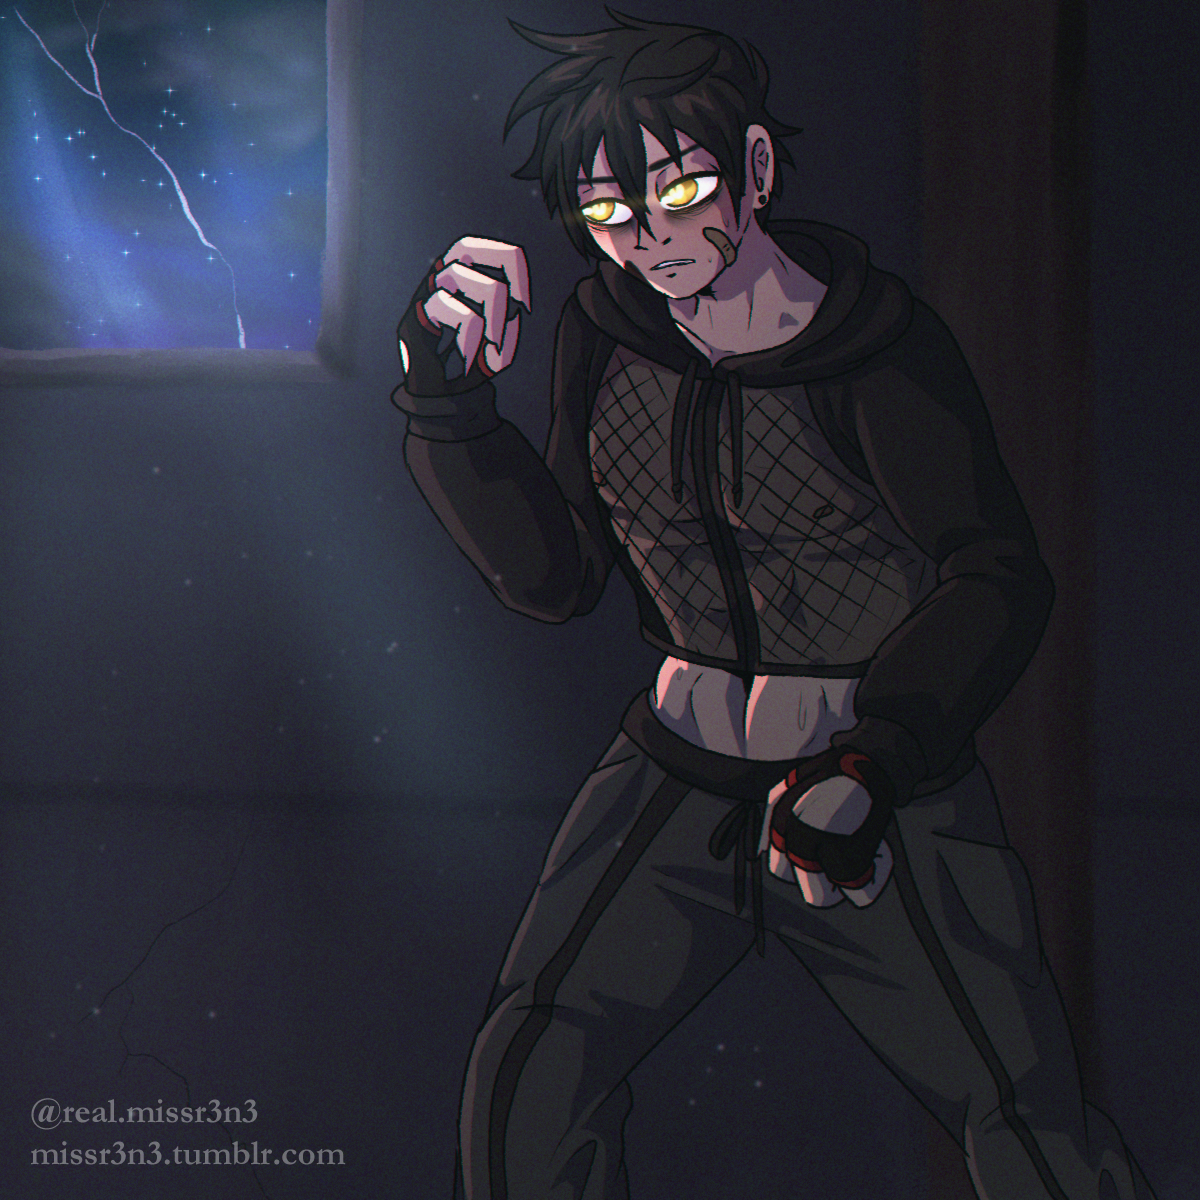 wes night from rad mad venture wearing a mesh crop top and sweatpants while training late at night